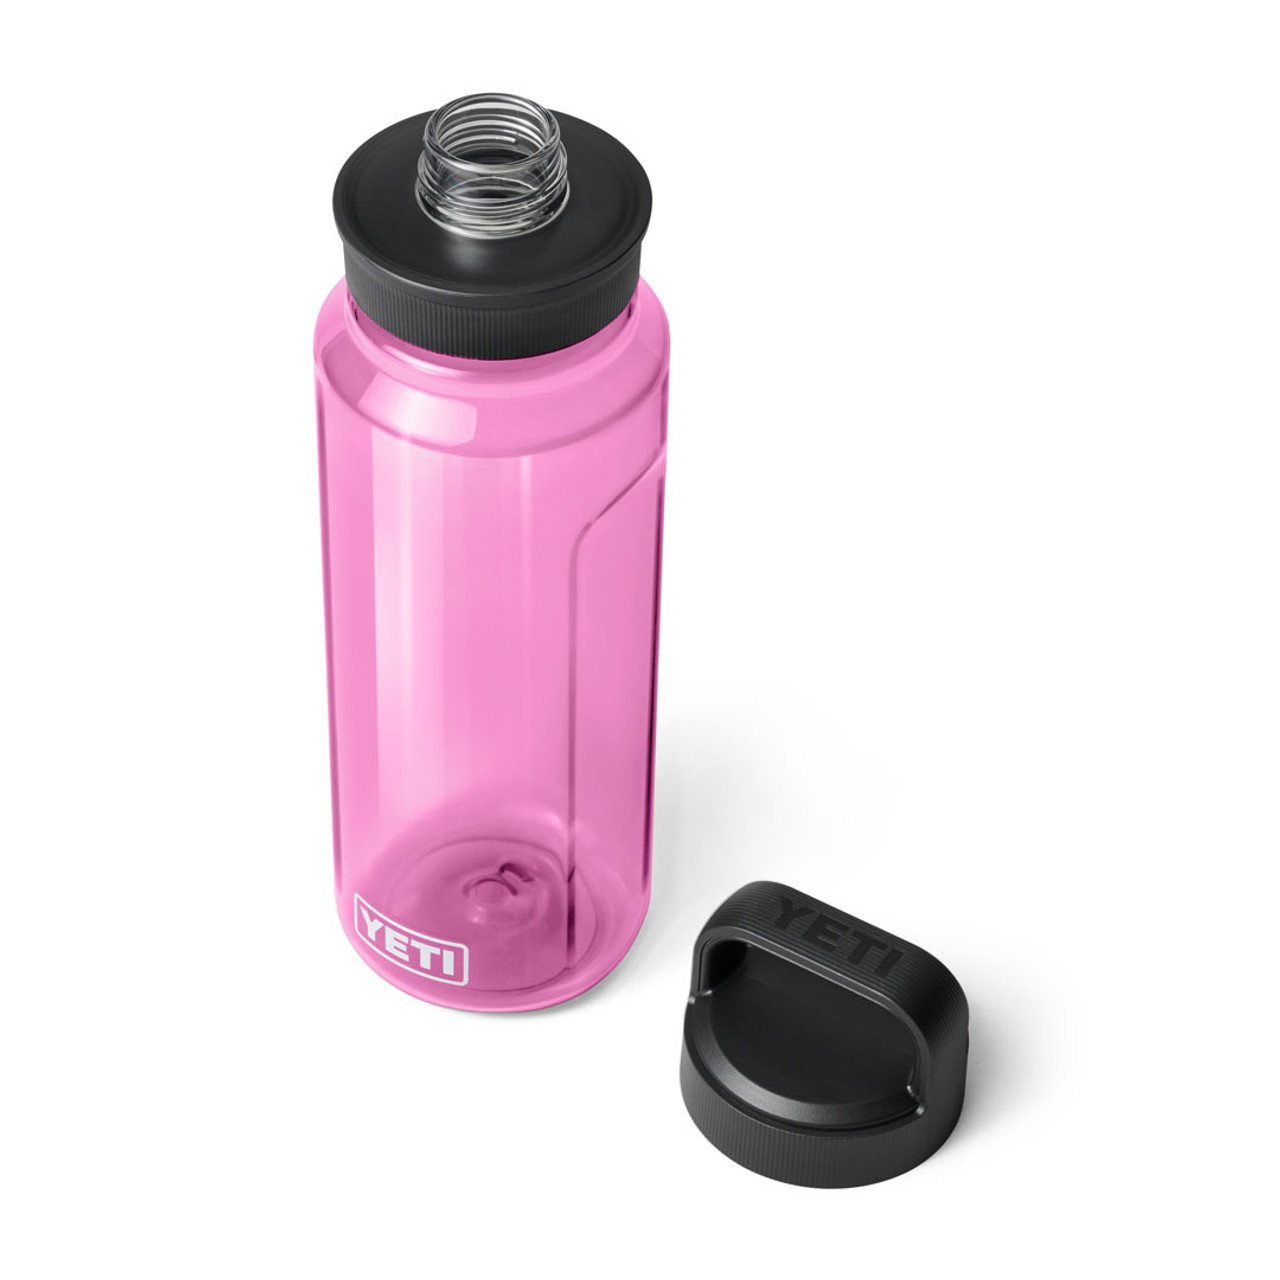 https://cdn11.bigcommerce.com/s-ppsyskcavg/images/stencil/1280x1280/products/68675/248137/YETI_Wholesale_Drinkware_Yonder_1L_Power_Pink_3qtr_Cap_Off_0867_B_2400x2400__56873.1694635191.jpg?c=2?imbypass=on